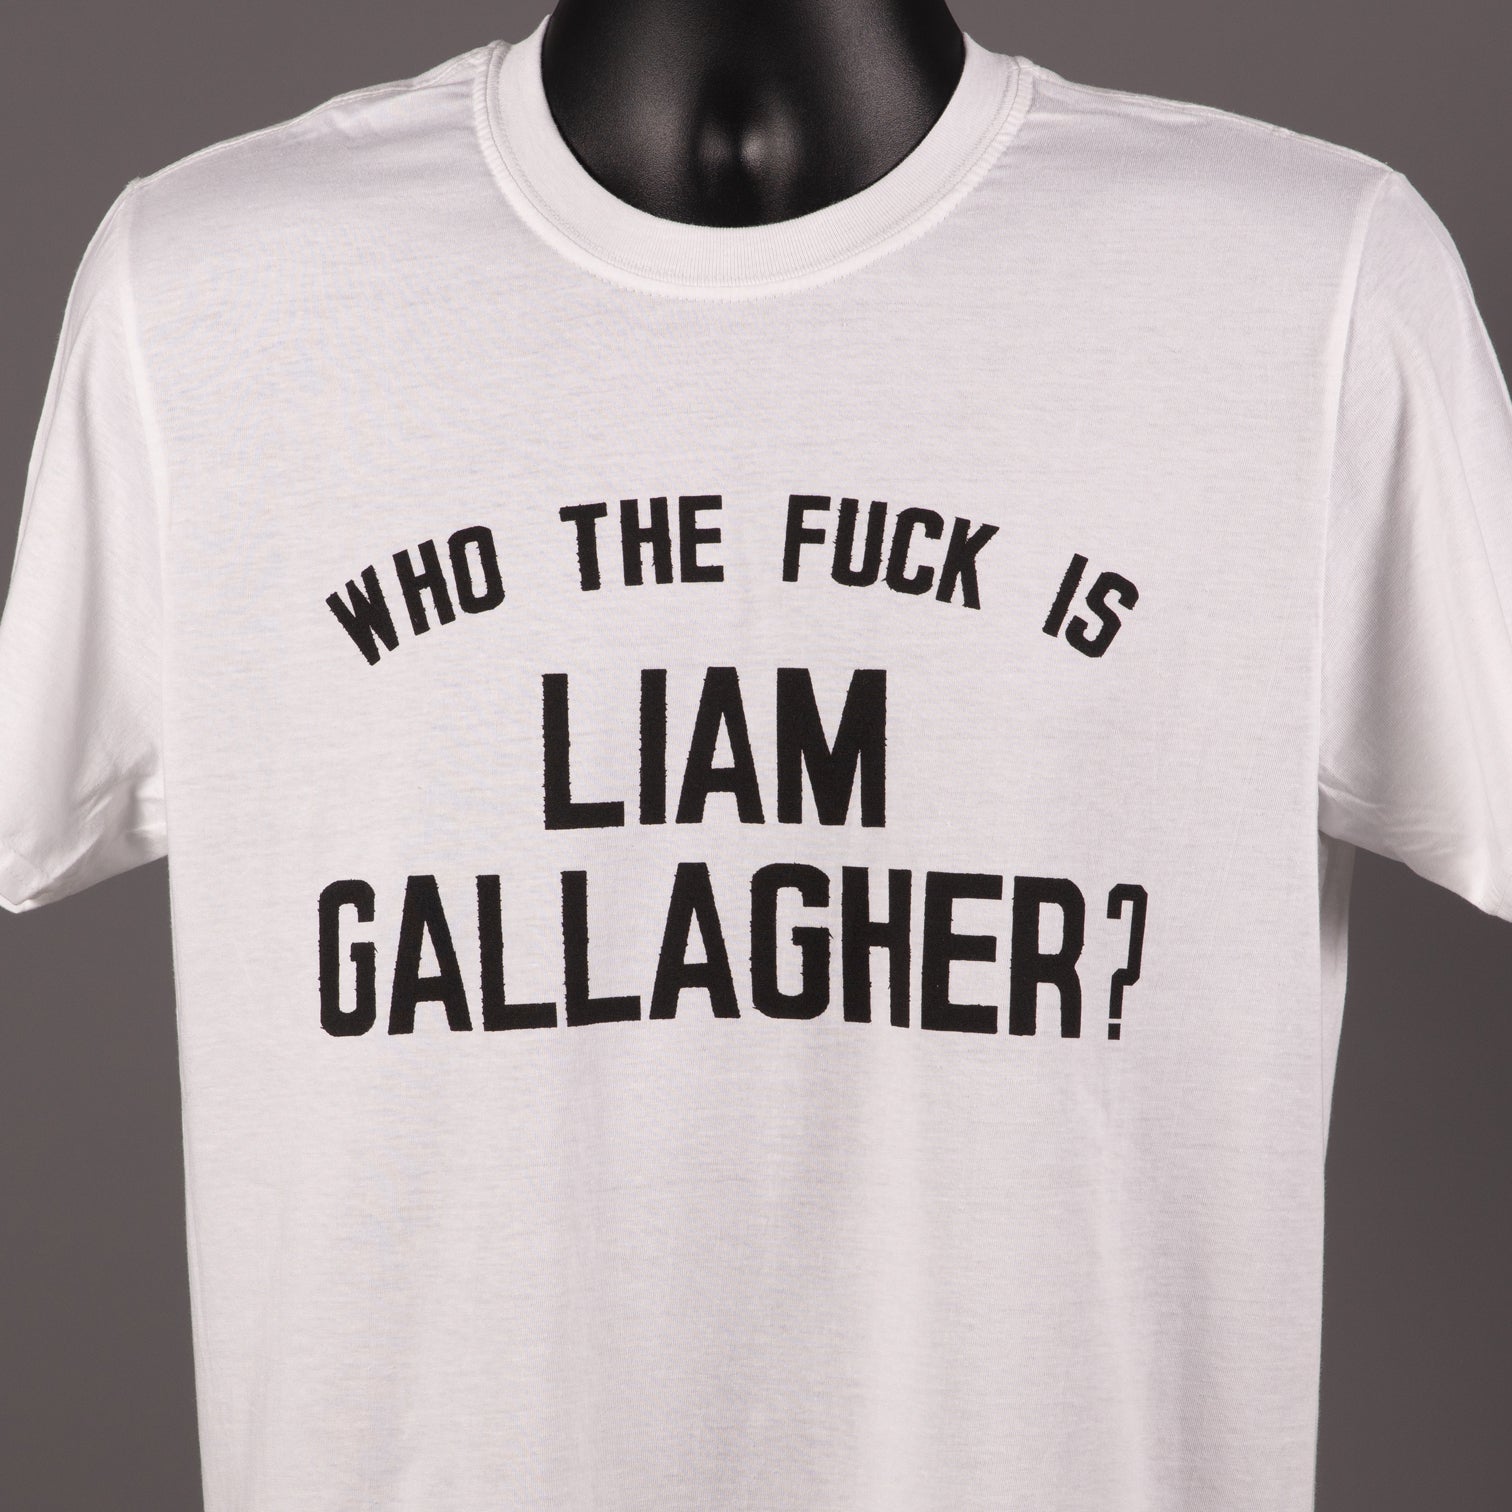 Who The Fuck Is Liam Gallagher? T Shirt - End Of Line